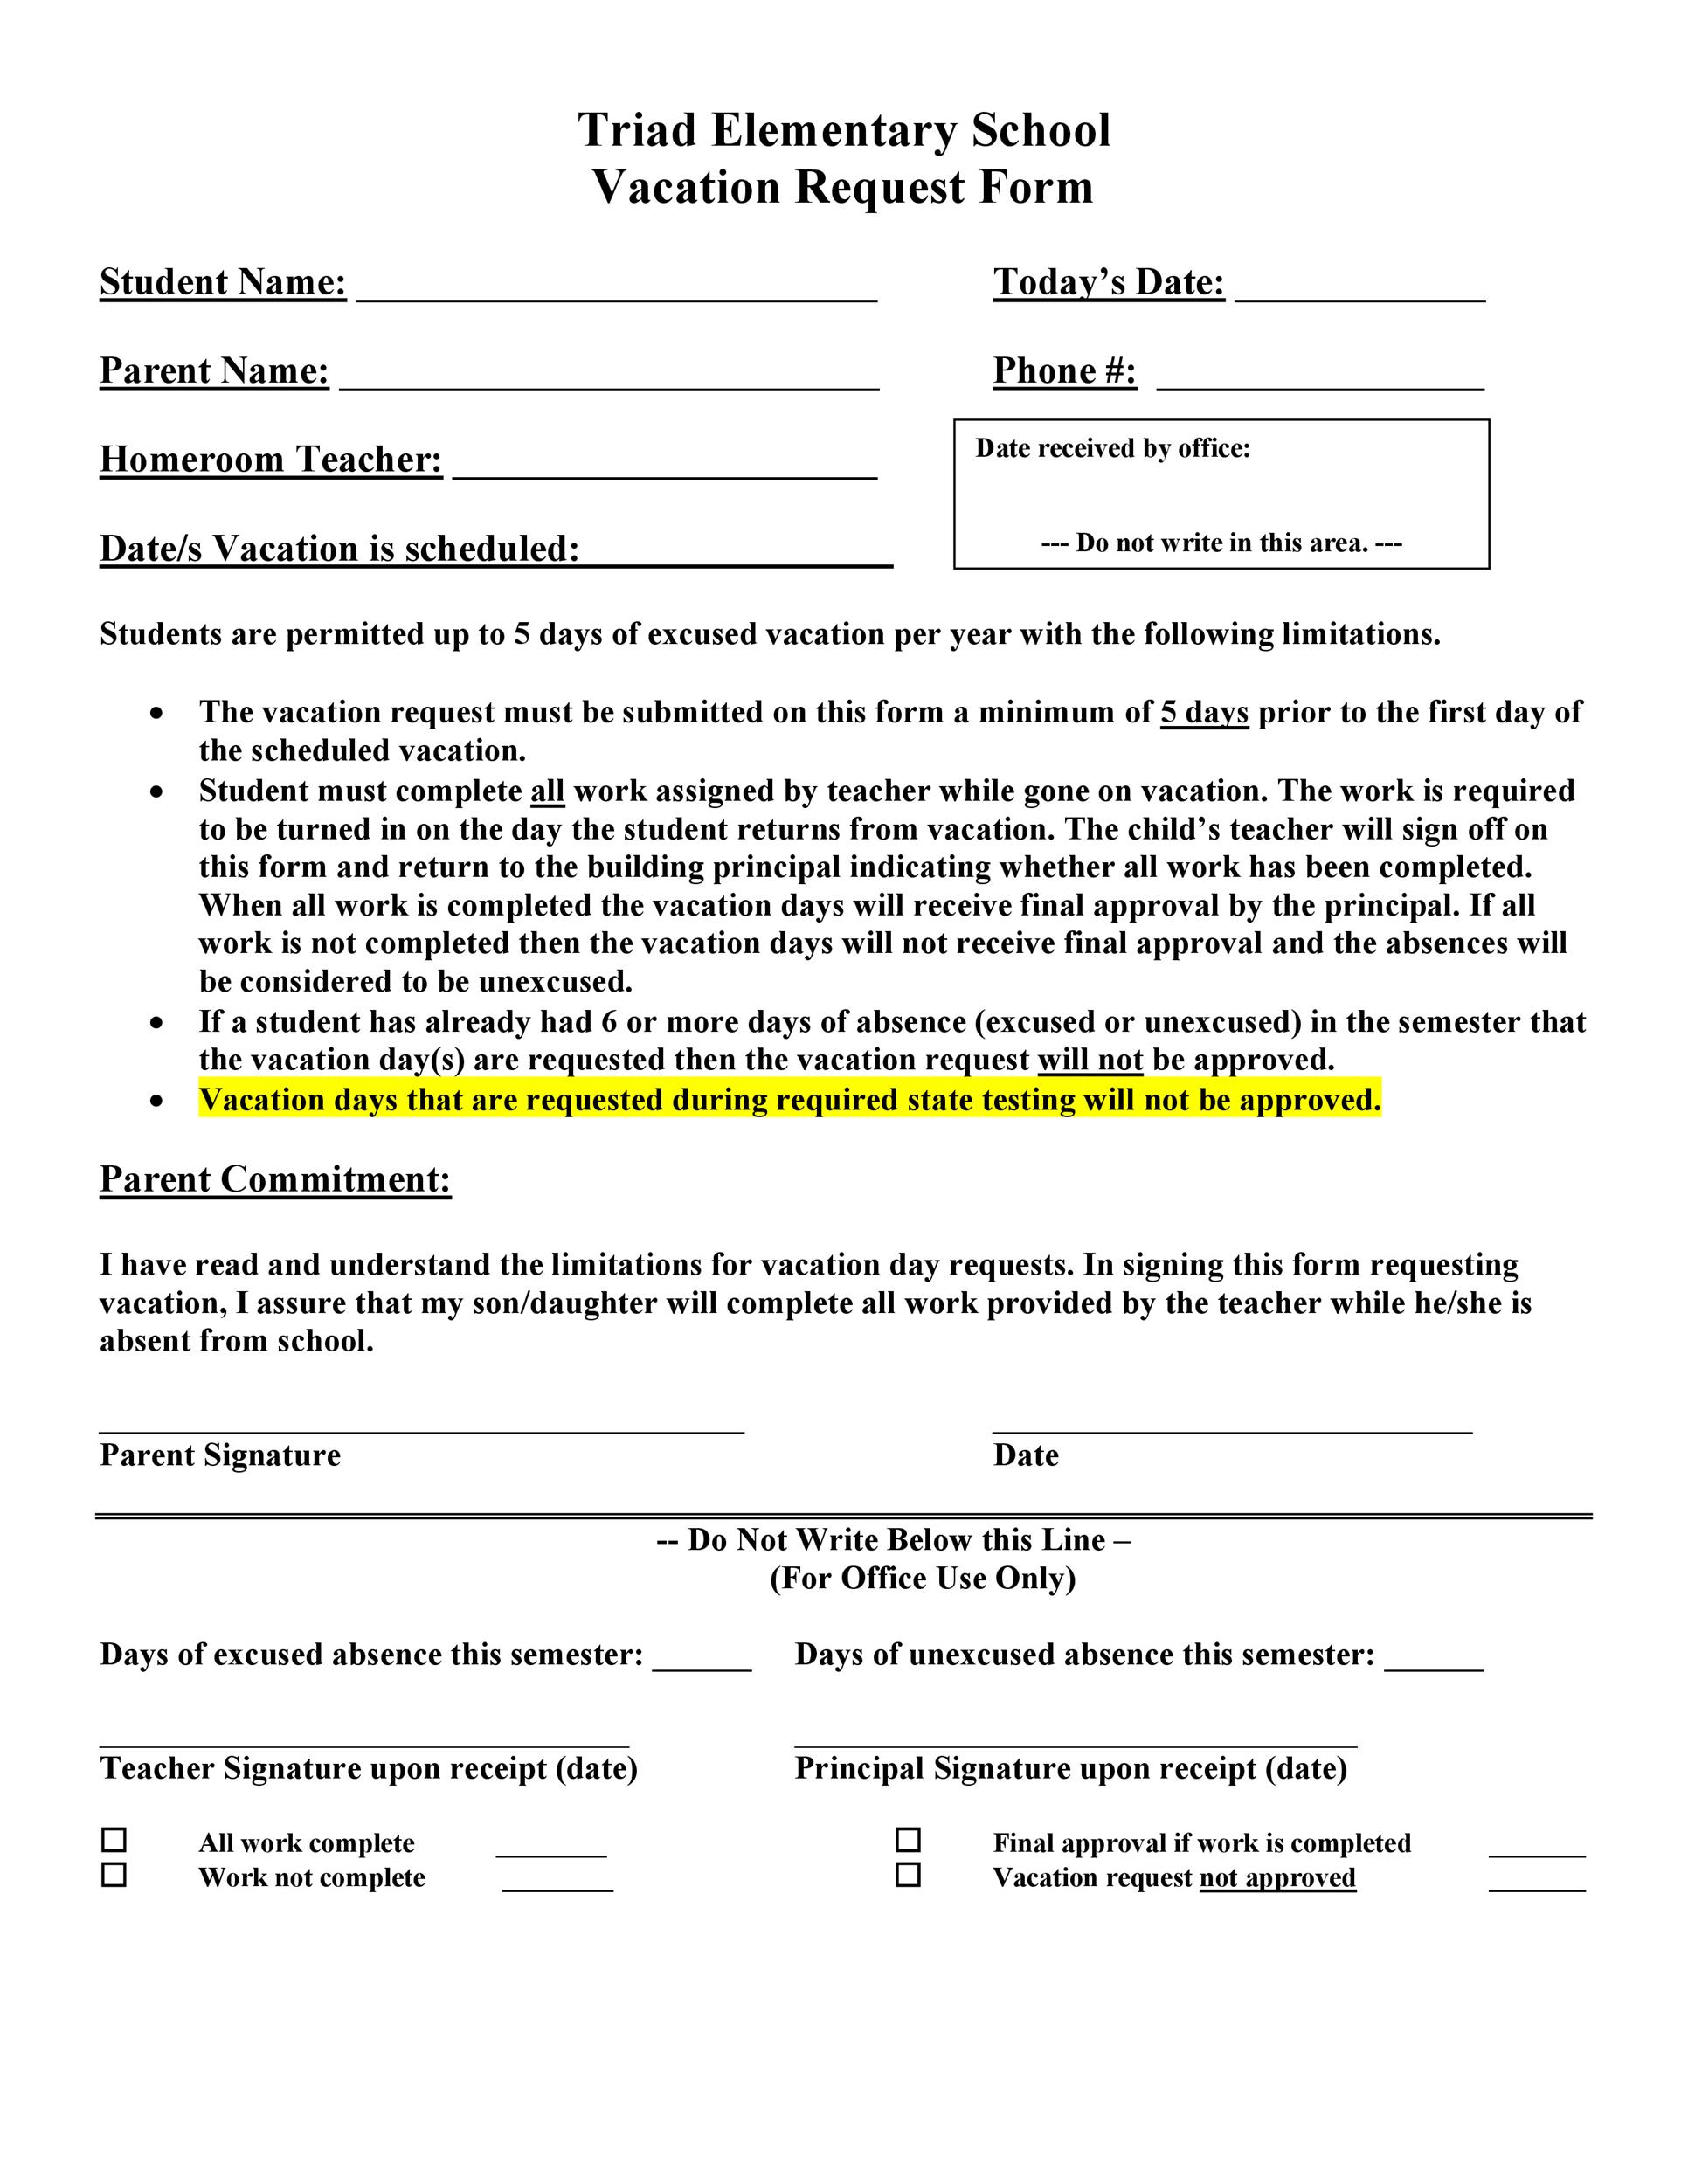 50-professional-employee-vacation-request-forms-word-templatelab